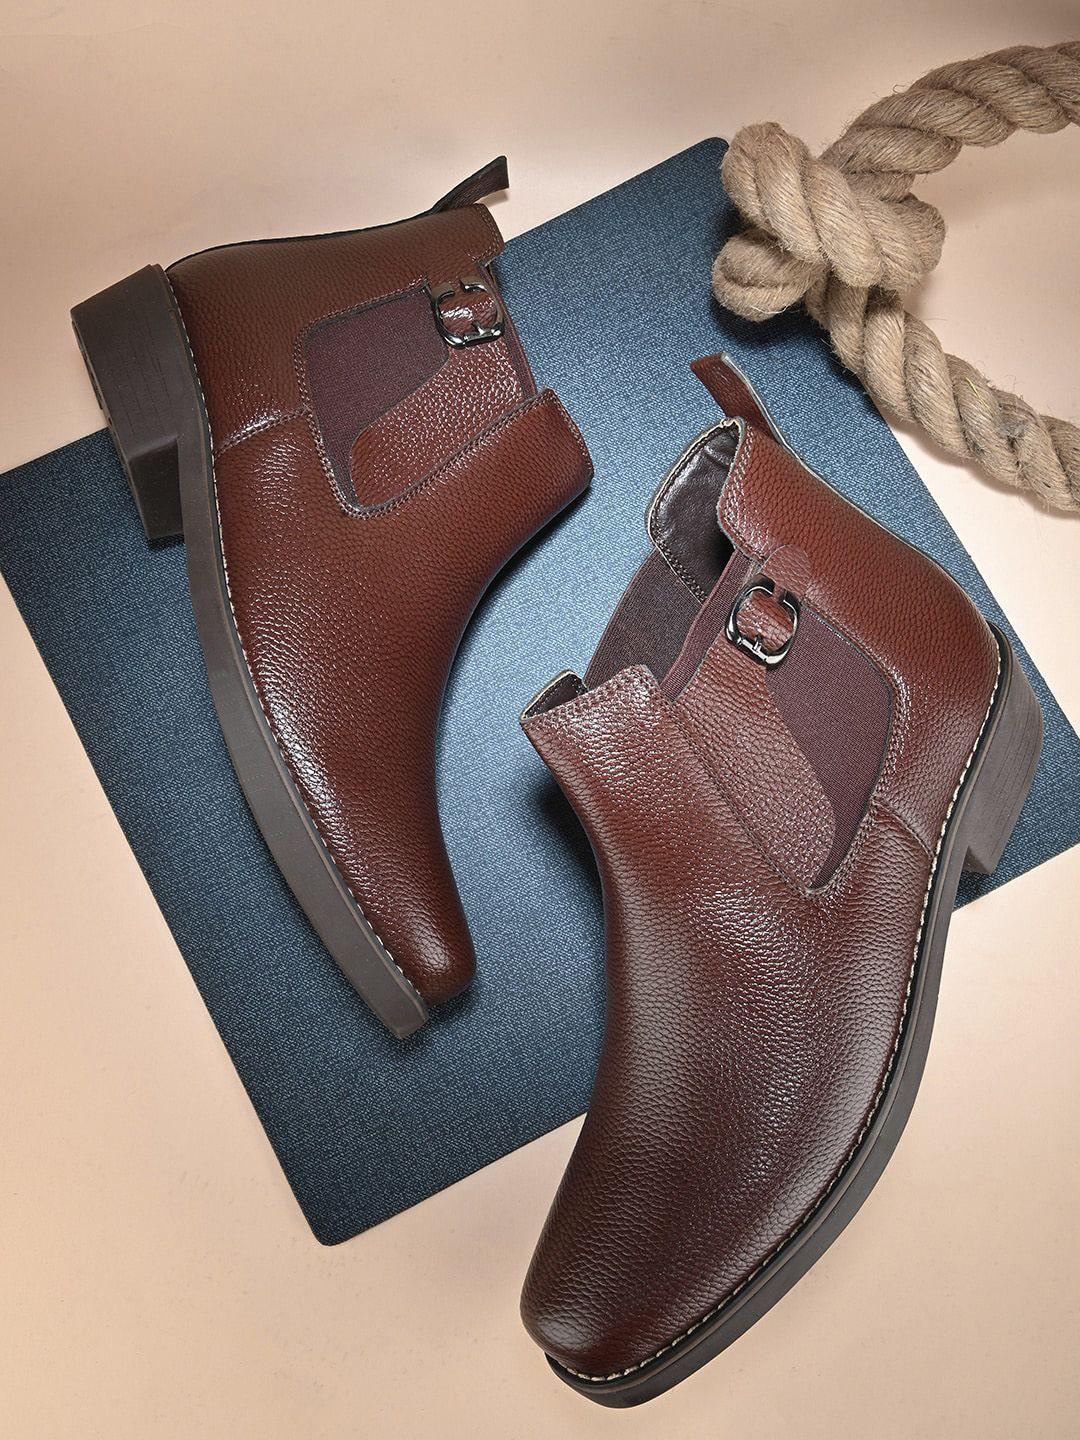 the roadster lifestyle co. men brown mid top block-heel chelsea boots with buckle detail